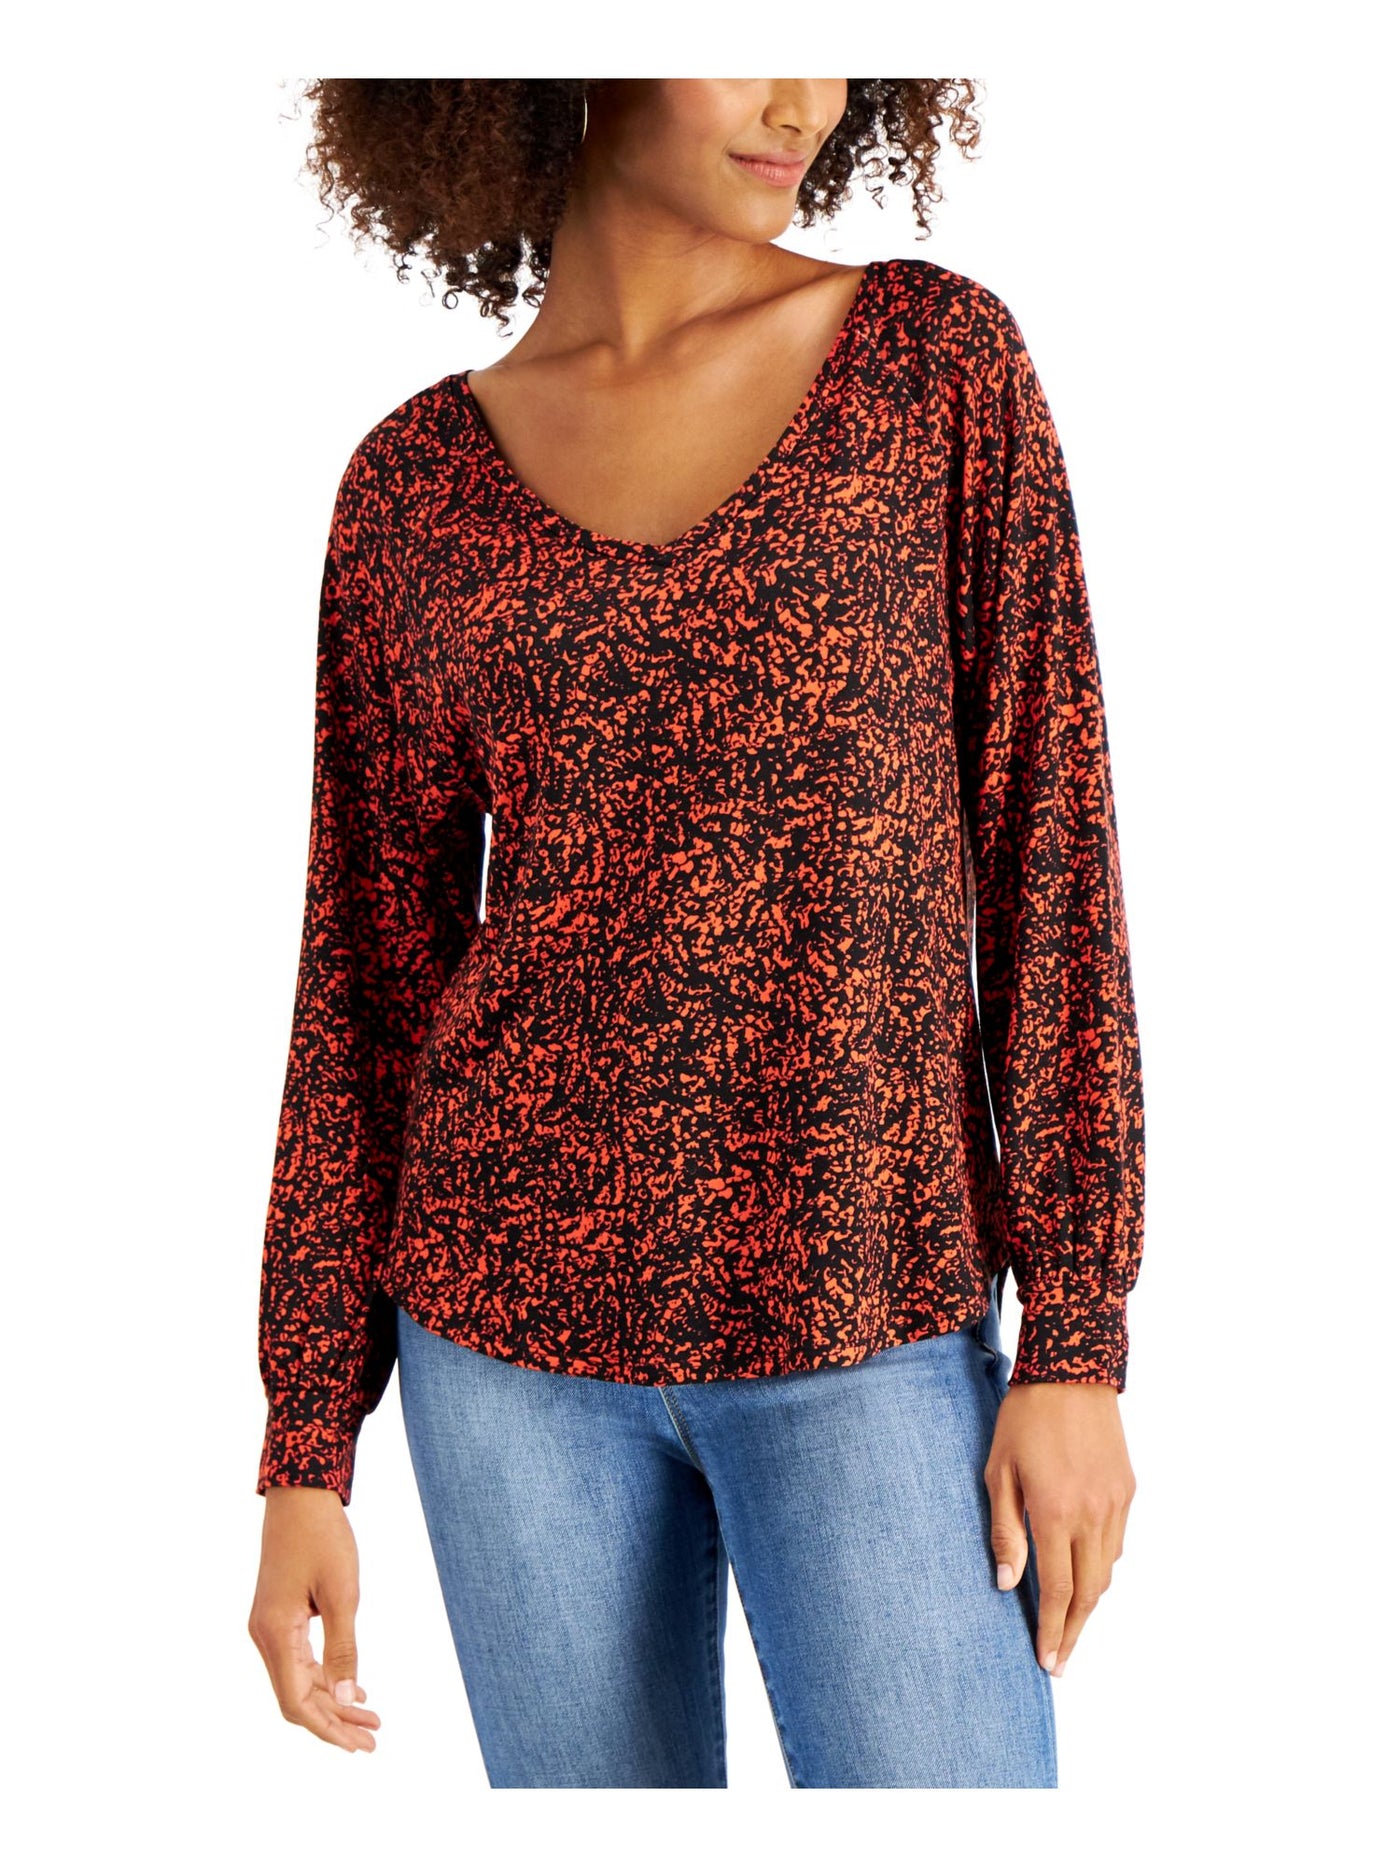 WILLOW DRIVE Womens Black Printed Cuffed Scoop Neck Top Size: S